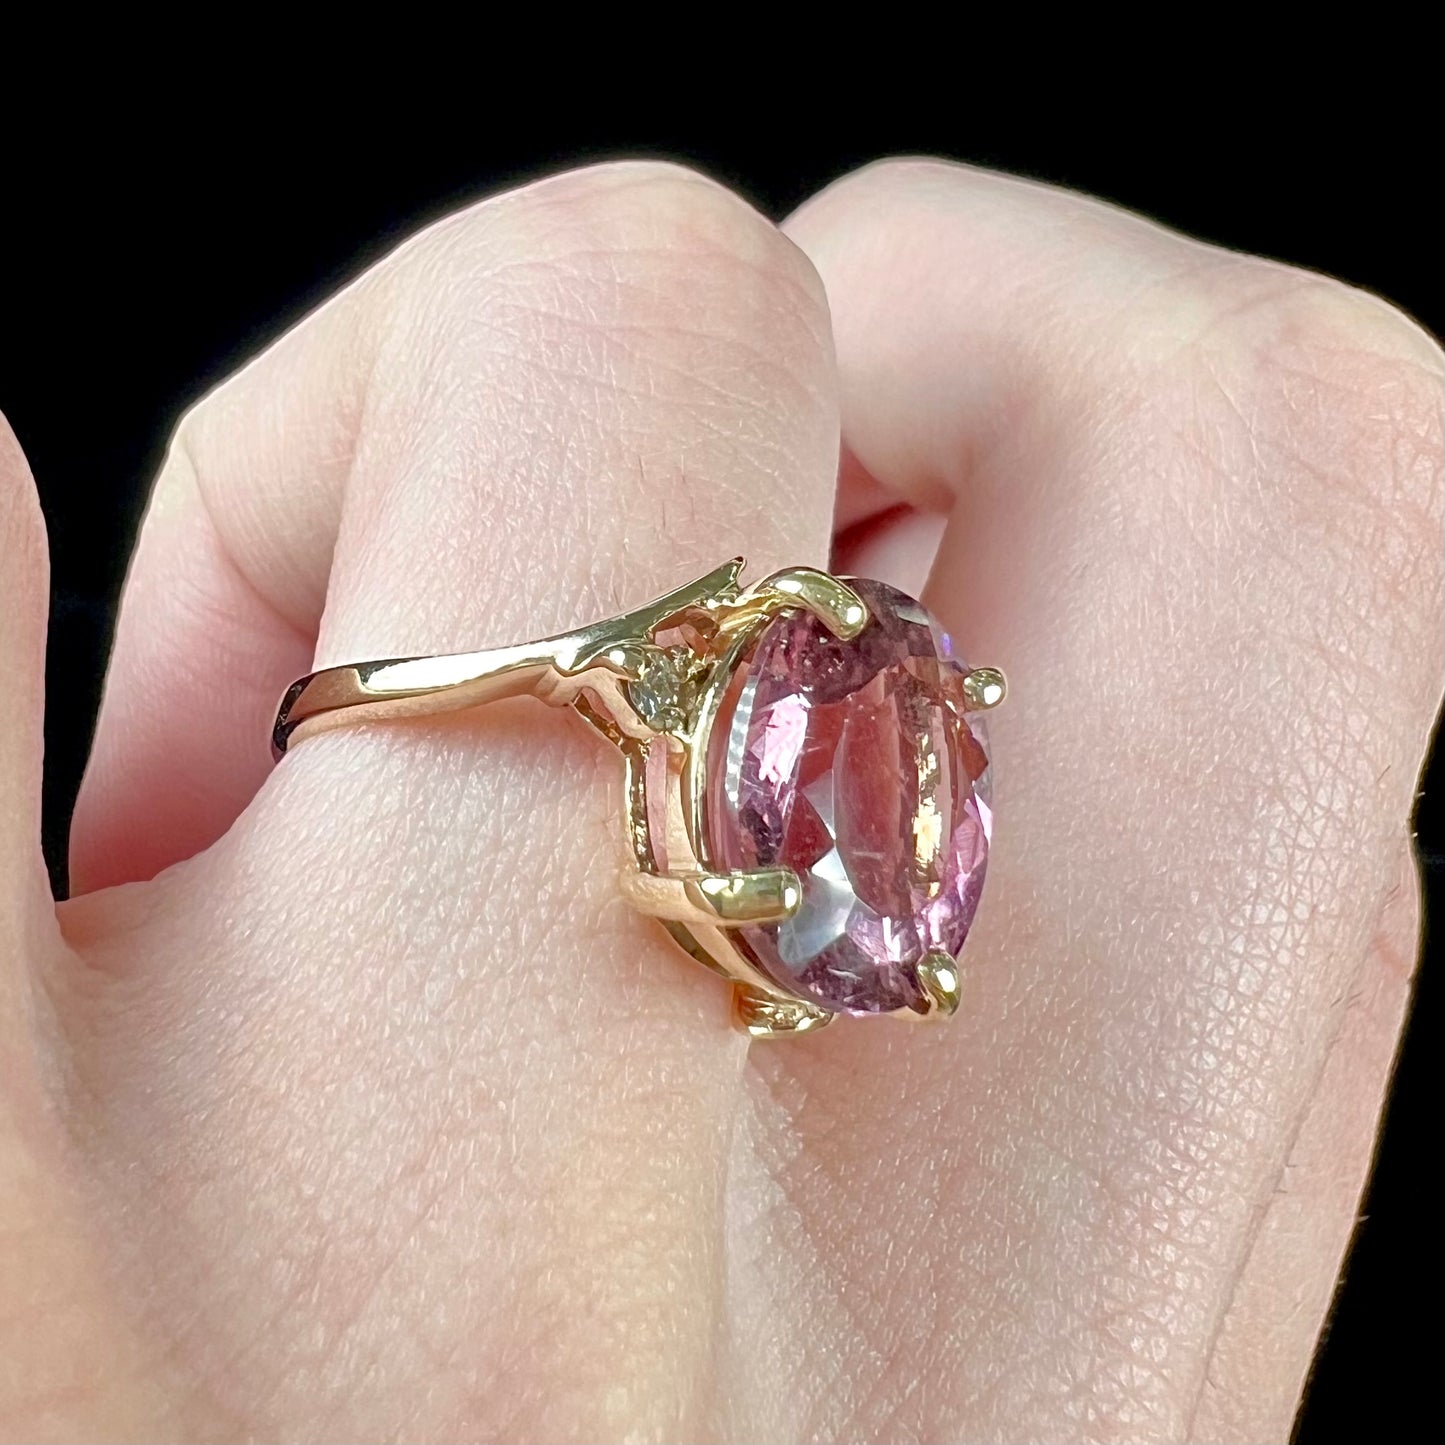 A ladies' yellow gold, faceted oval cut purple tourmaline ring set with diamond accents.